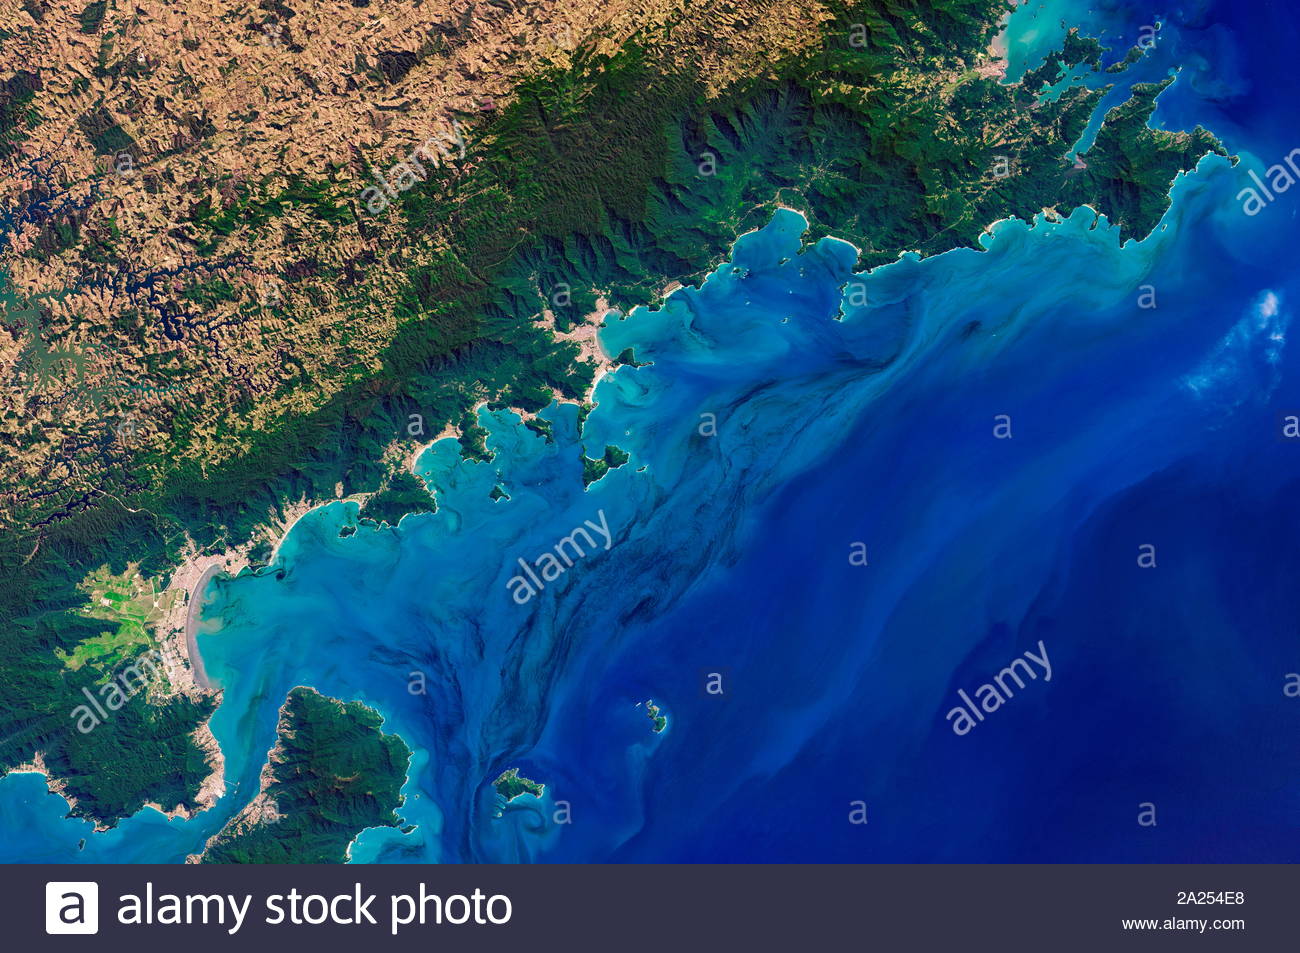 Phytoplankton bloom swirling in the waters off the coast of the Brazilian state of Sao Paulo. The Operational Land Imager (OLI) on the Landsat 8 satellite captured the image on September 5, 2017.  identified the species as likely to be Gymnodinium aureolum. Stock Photo